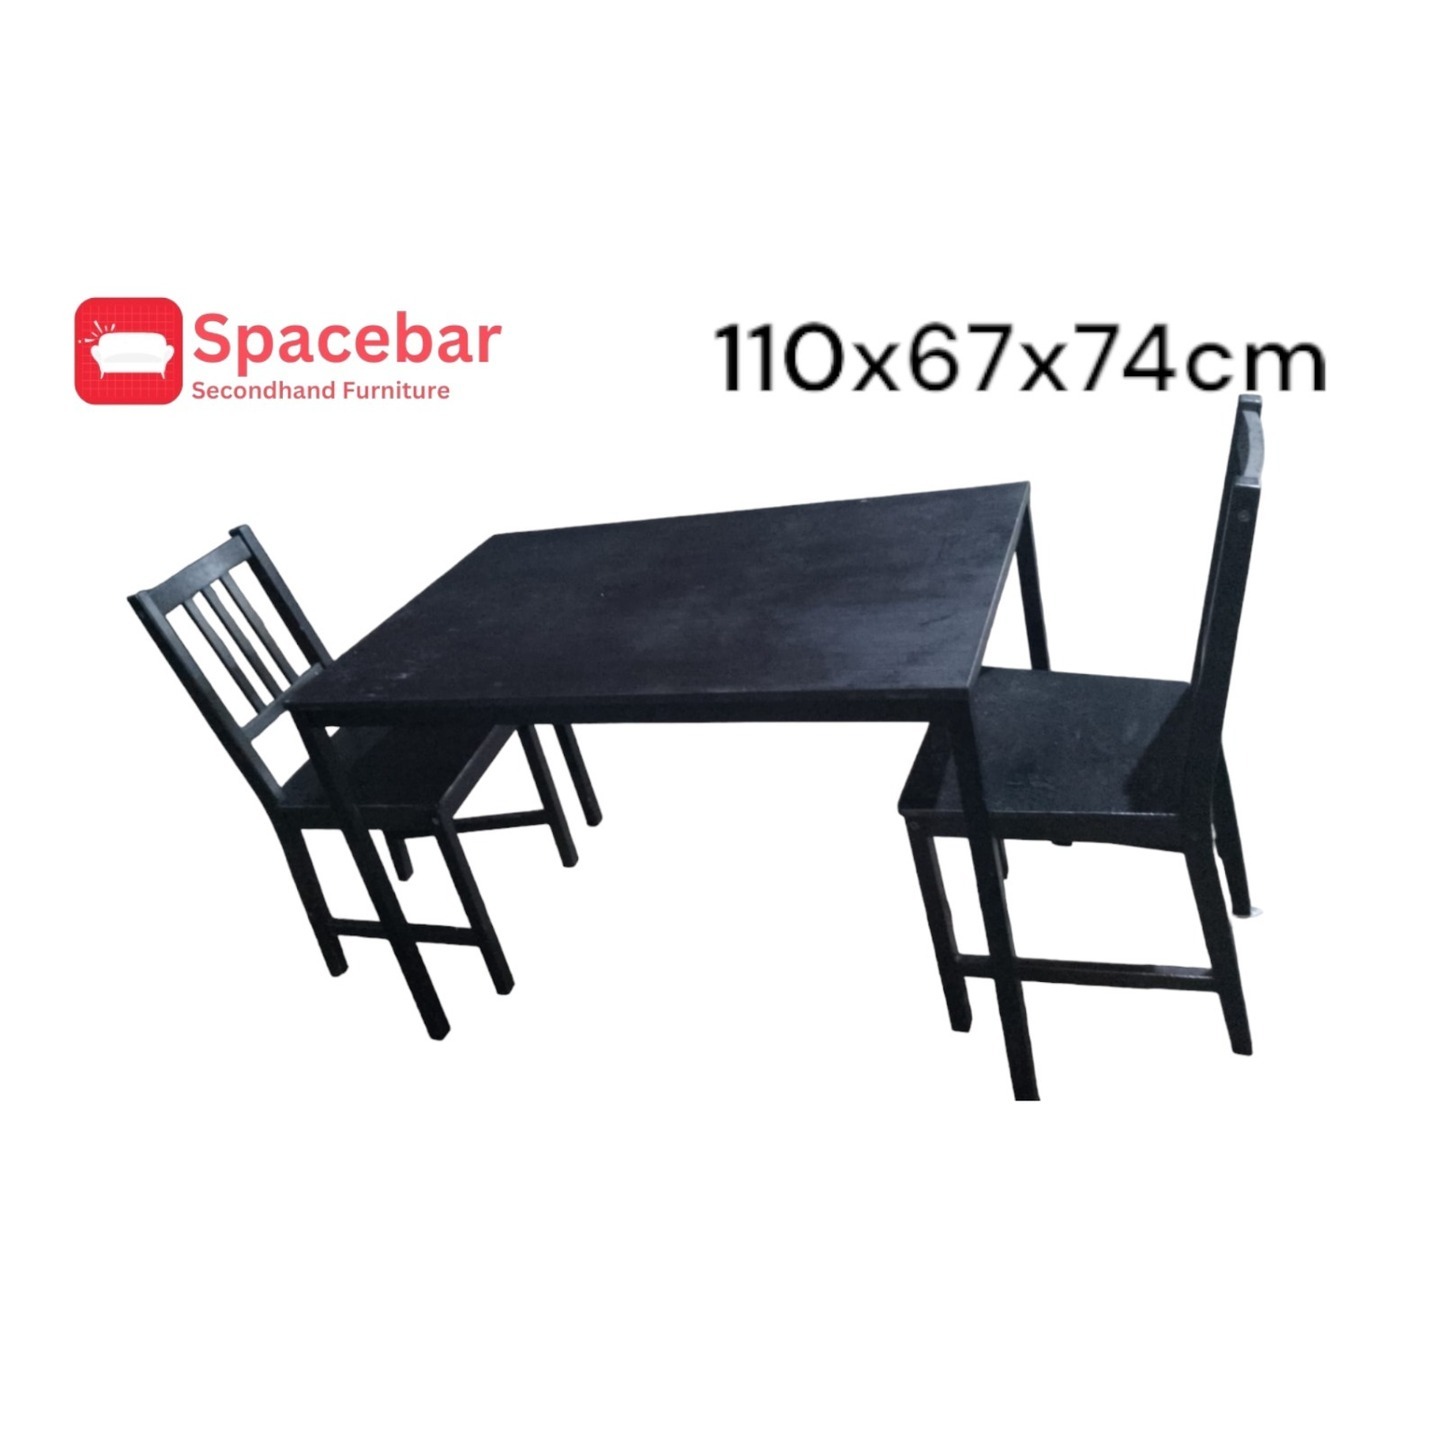 Dining Table with 2 Chairs